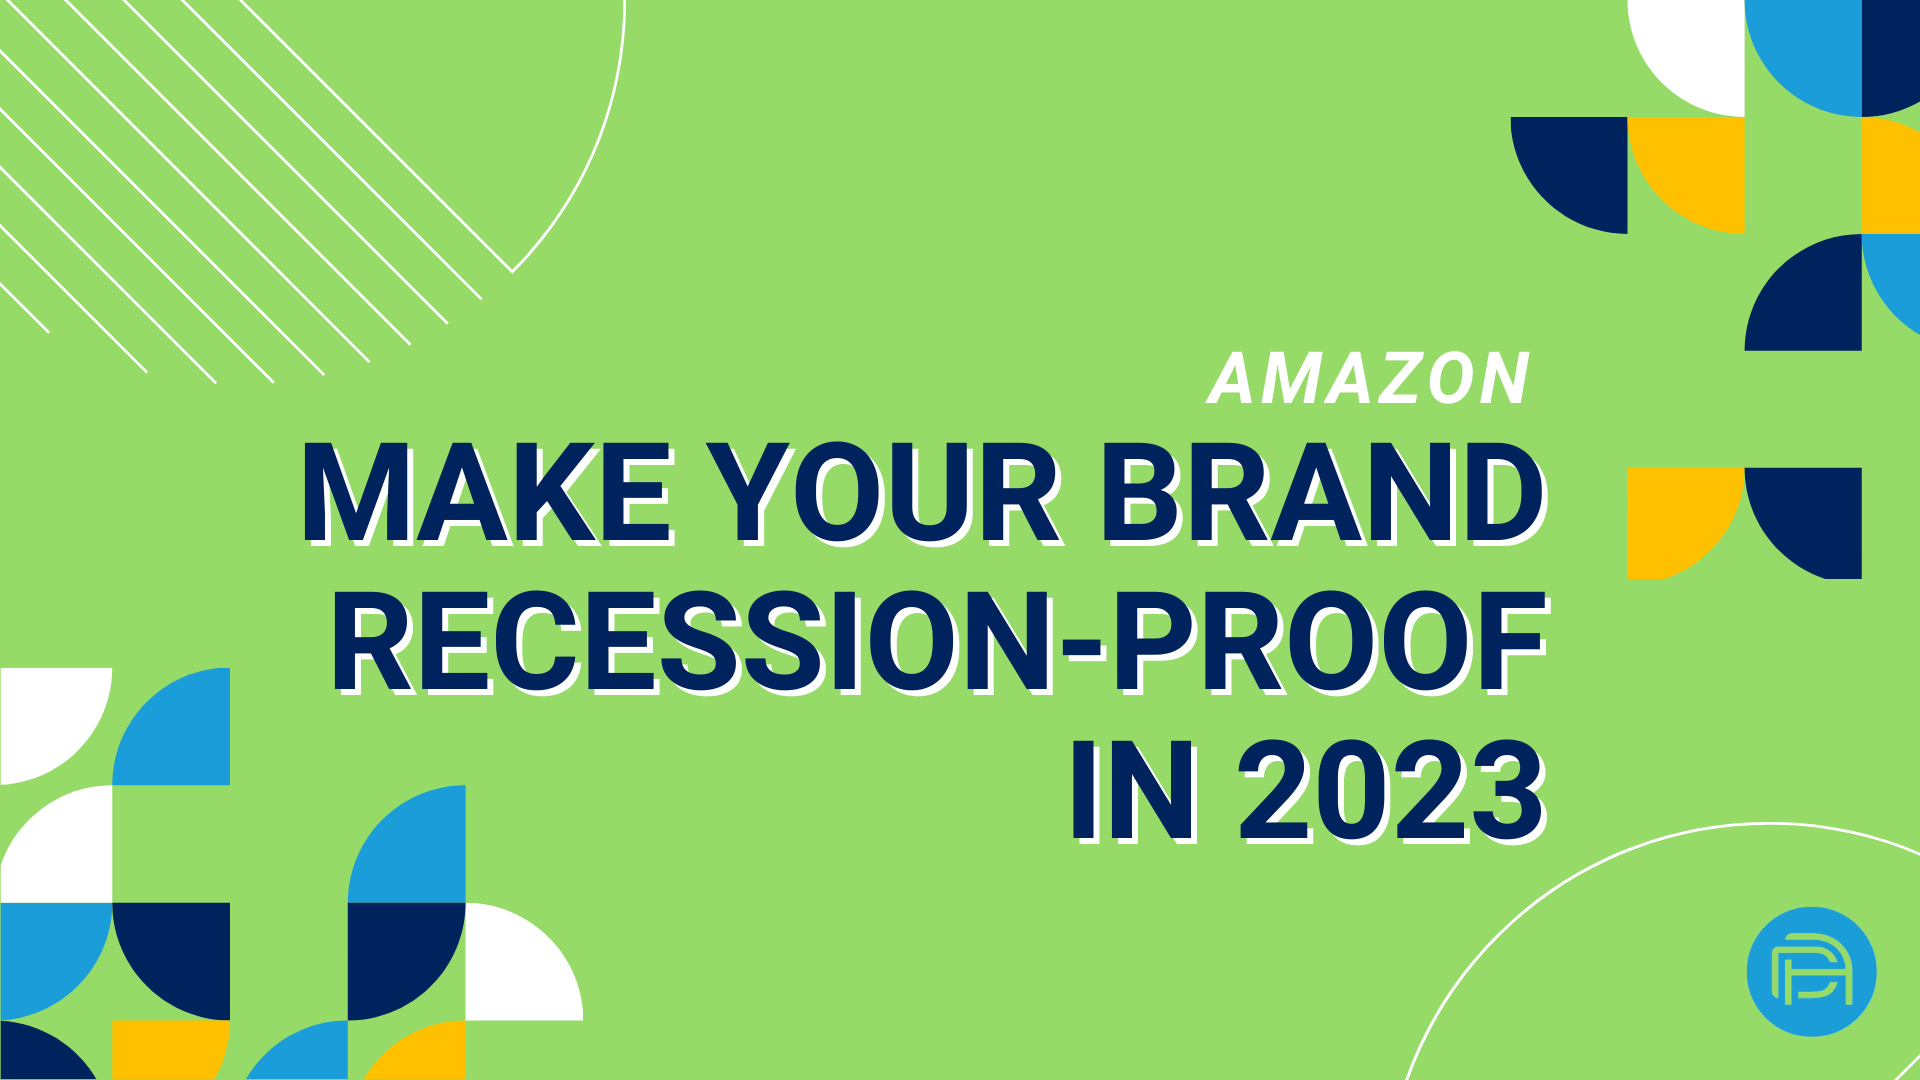 Amazon: Make Your Brand Recession-Proof in 2023